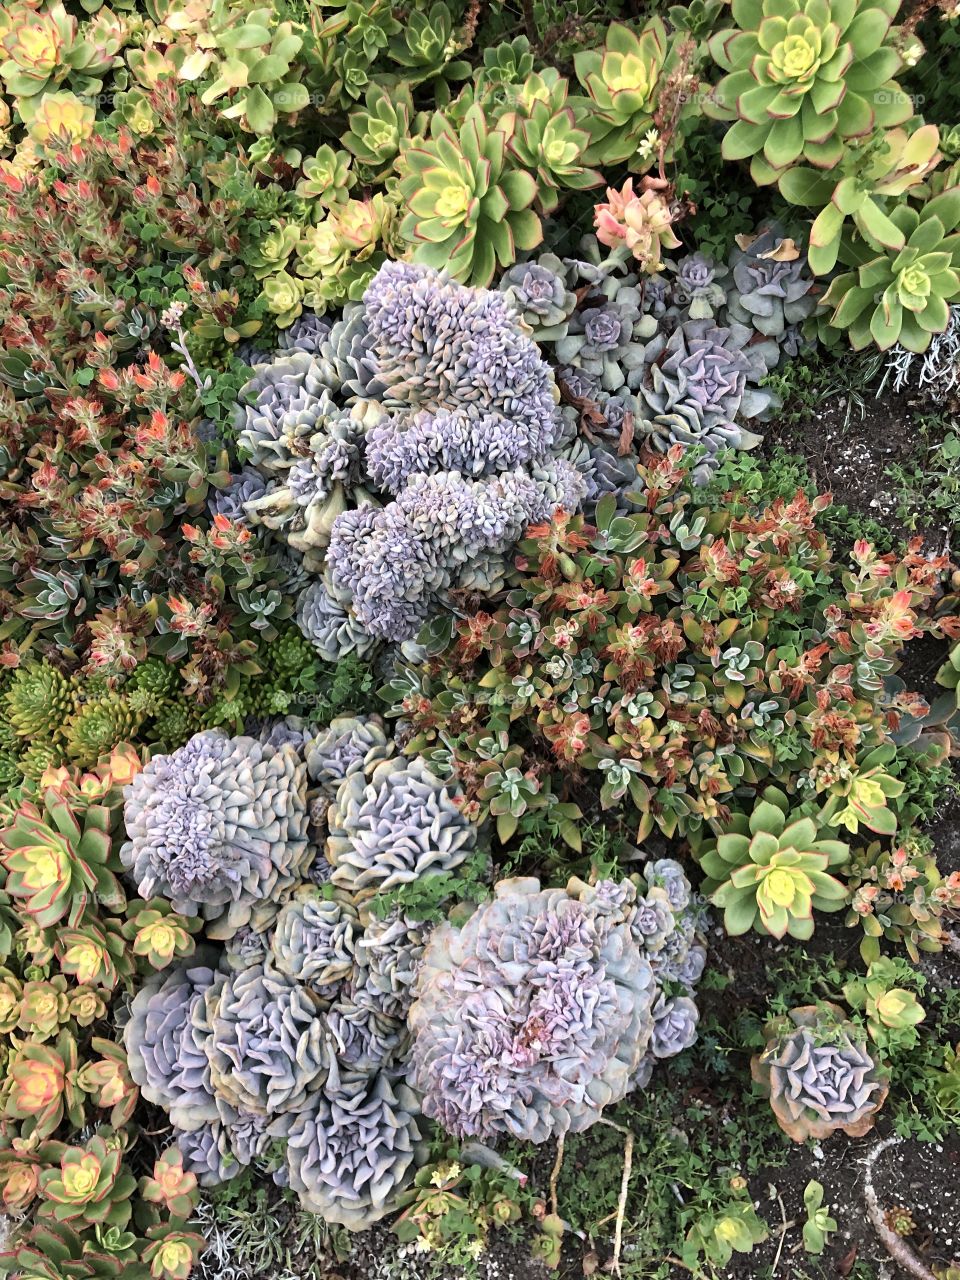 Medley of colorful succulent plants showcasing the beauty of nature with green, purple, and red